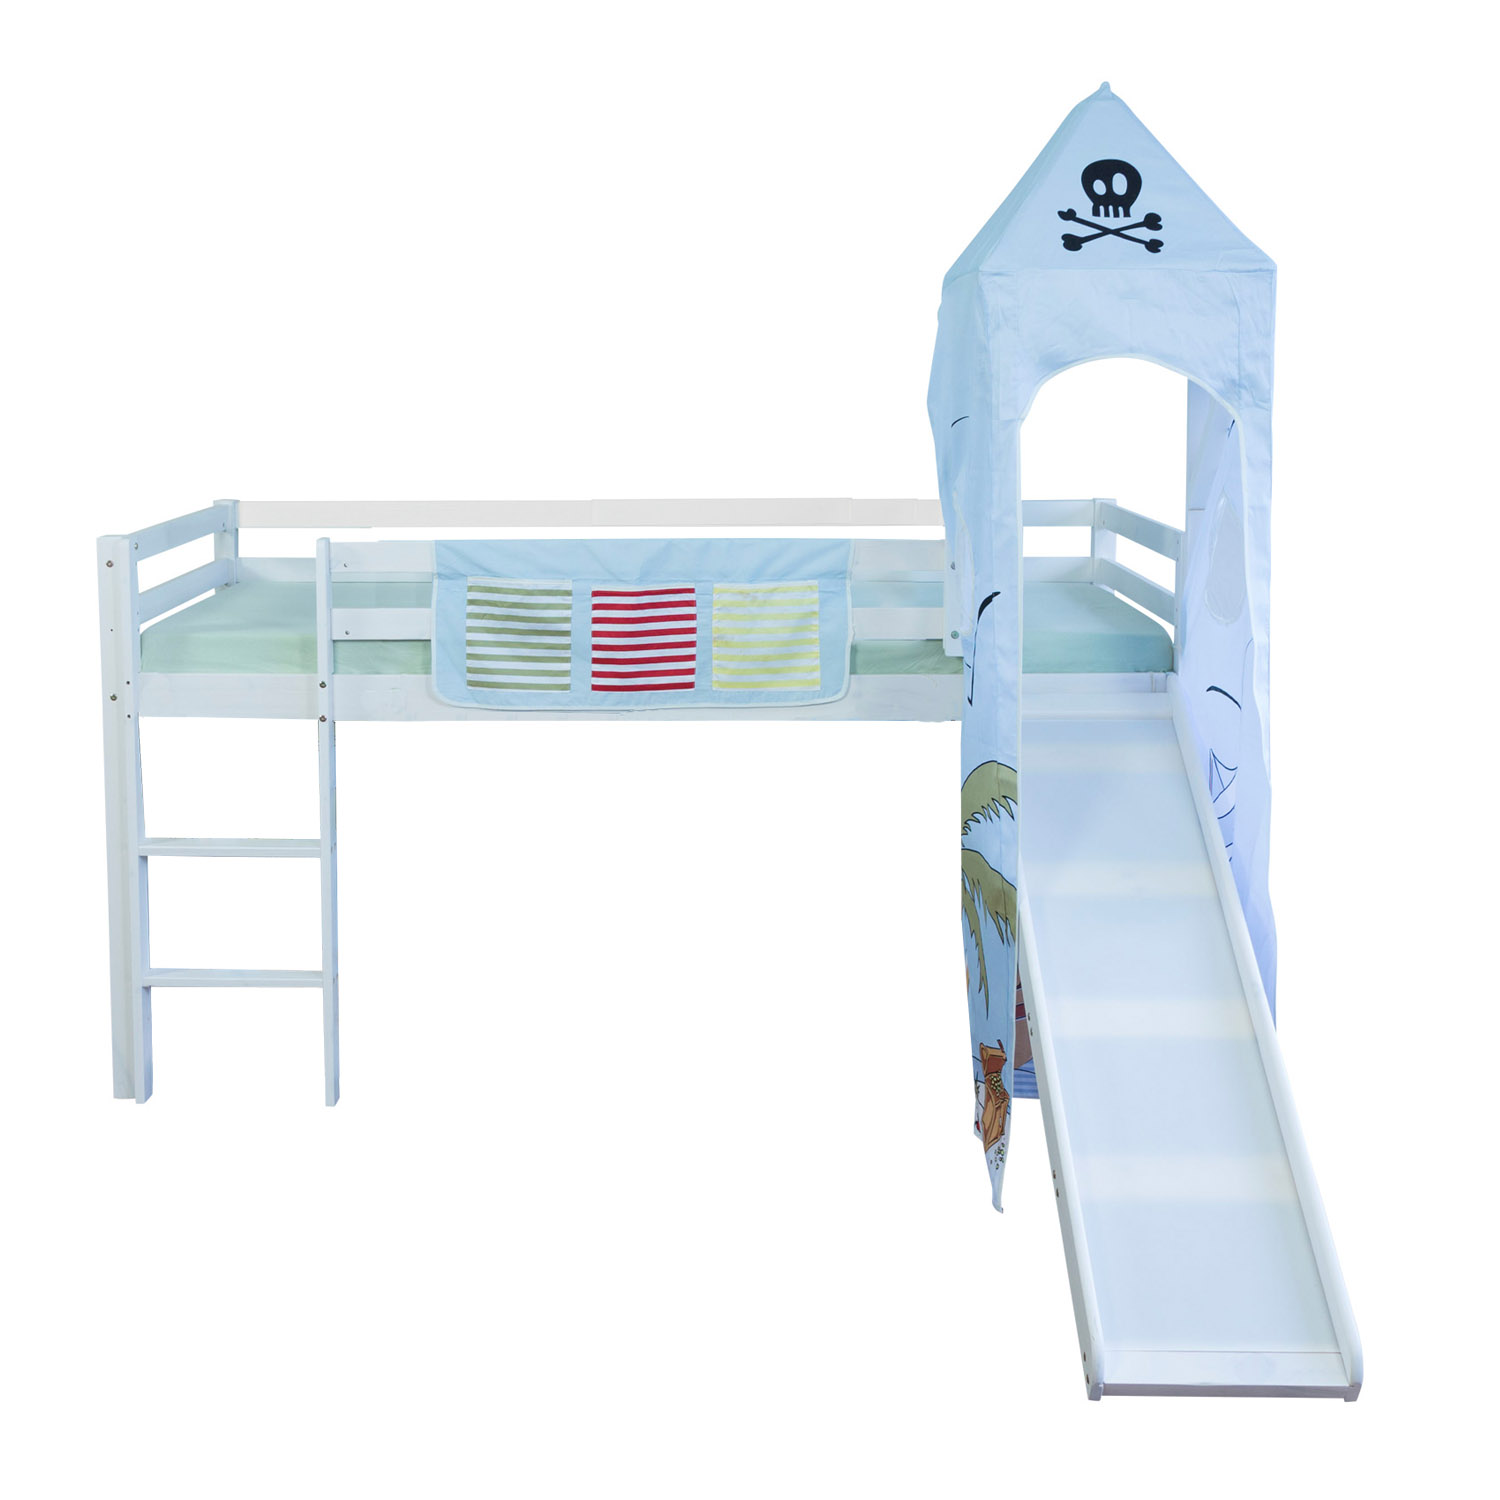 Loft Bed Play Bed Children 90x200 cm Bedstead Solid Wood Island Pirate with Ladder Slide Tower Curtain